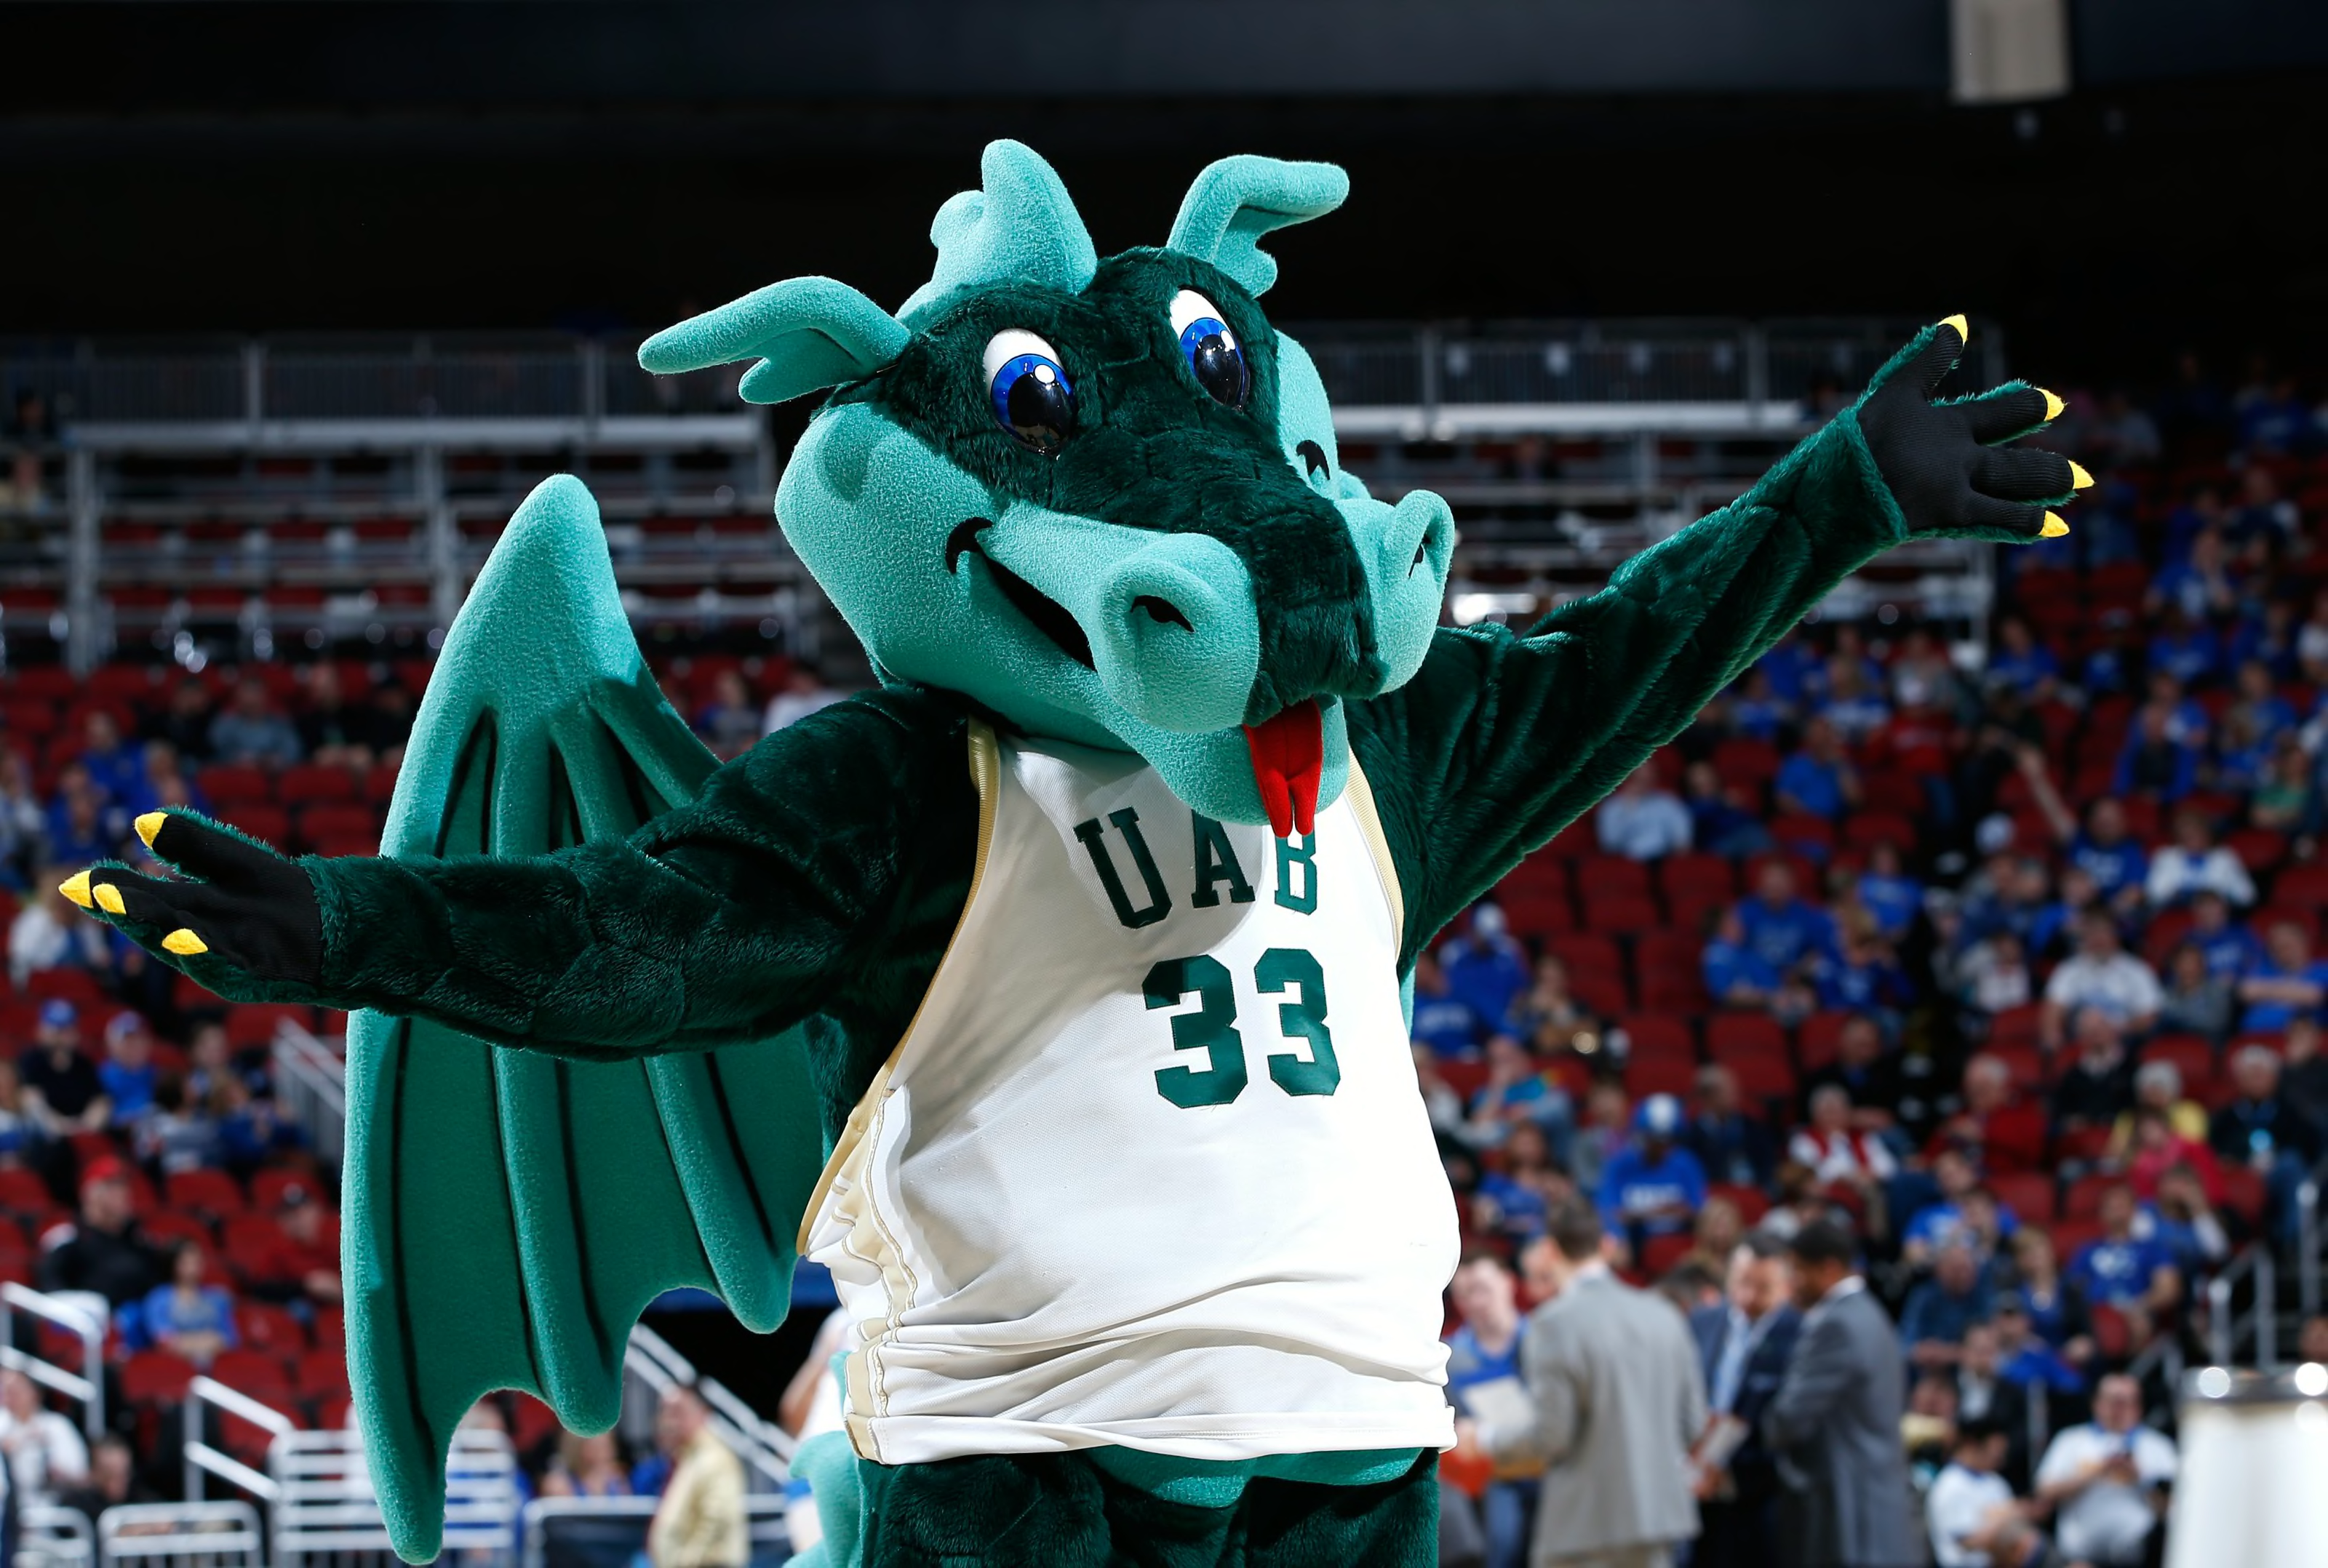 UAB mascot Blaze, in a basketball jersey.